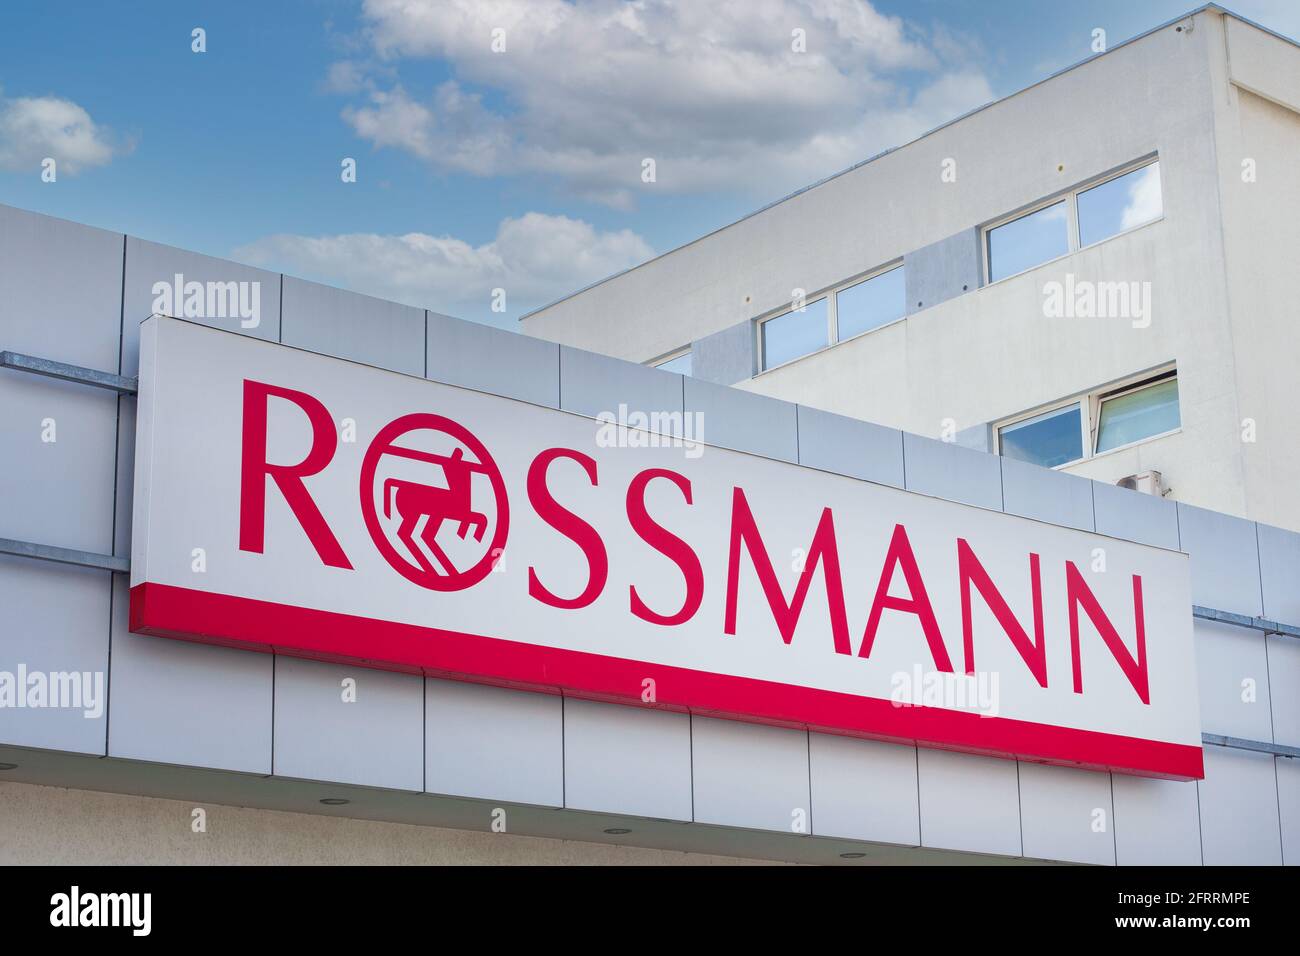 Rossmann cosmetics and beauty shop. Logo lettering Stock Photo - Alamy